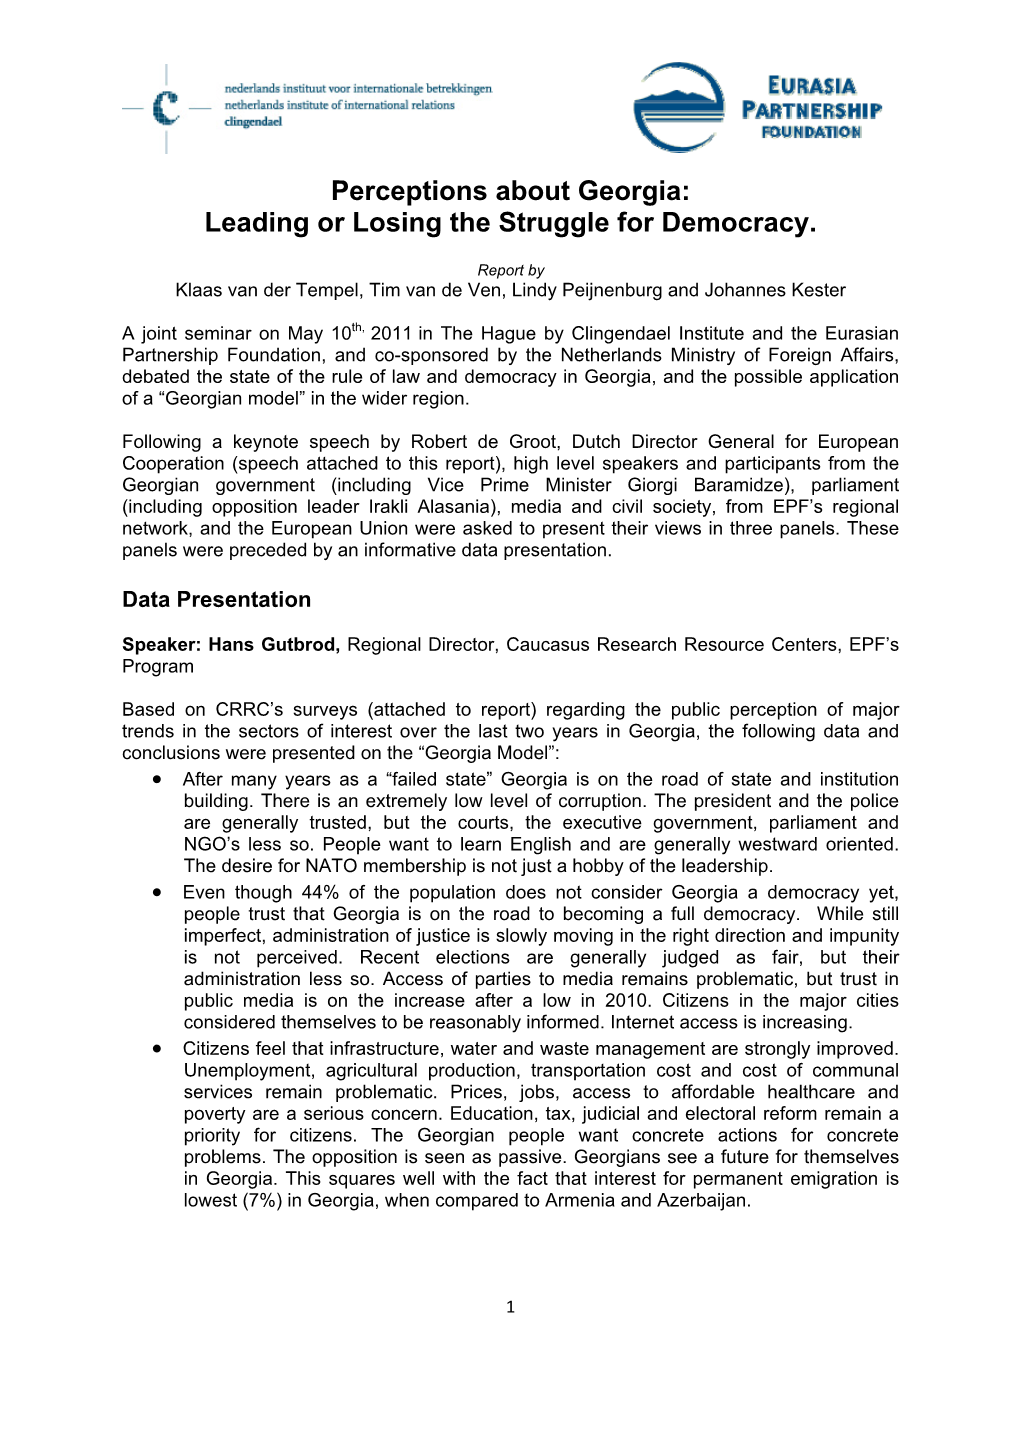 Perceptions About Georgia: Leading Or Losing the Struggle for Democracy